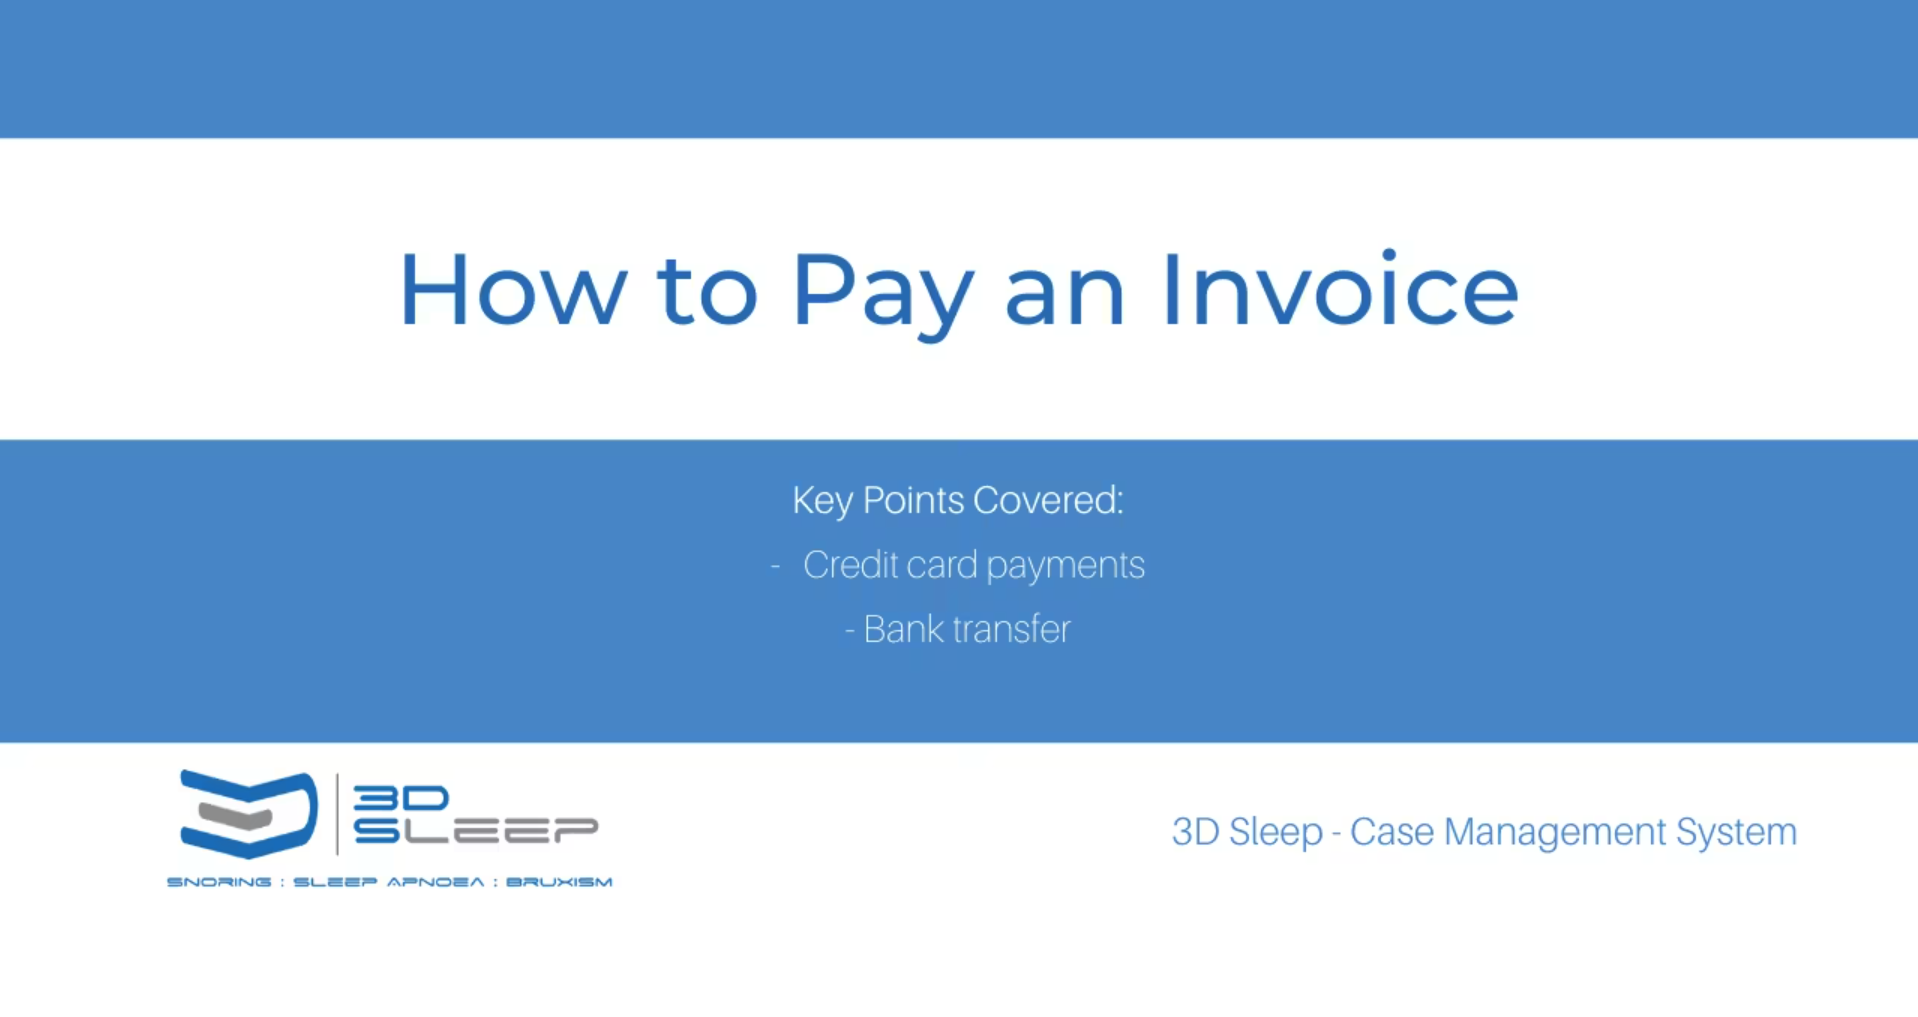 6. How to Pay an Invoice (Laboratory)